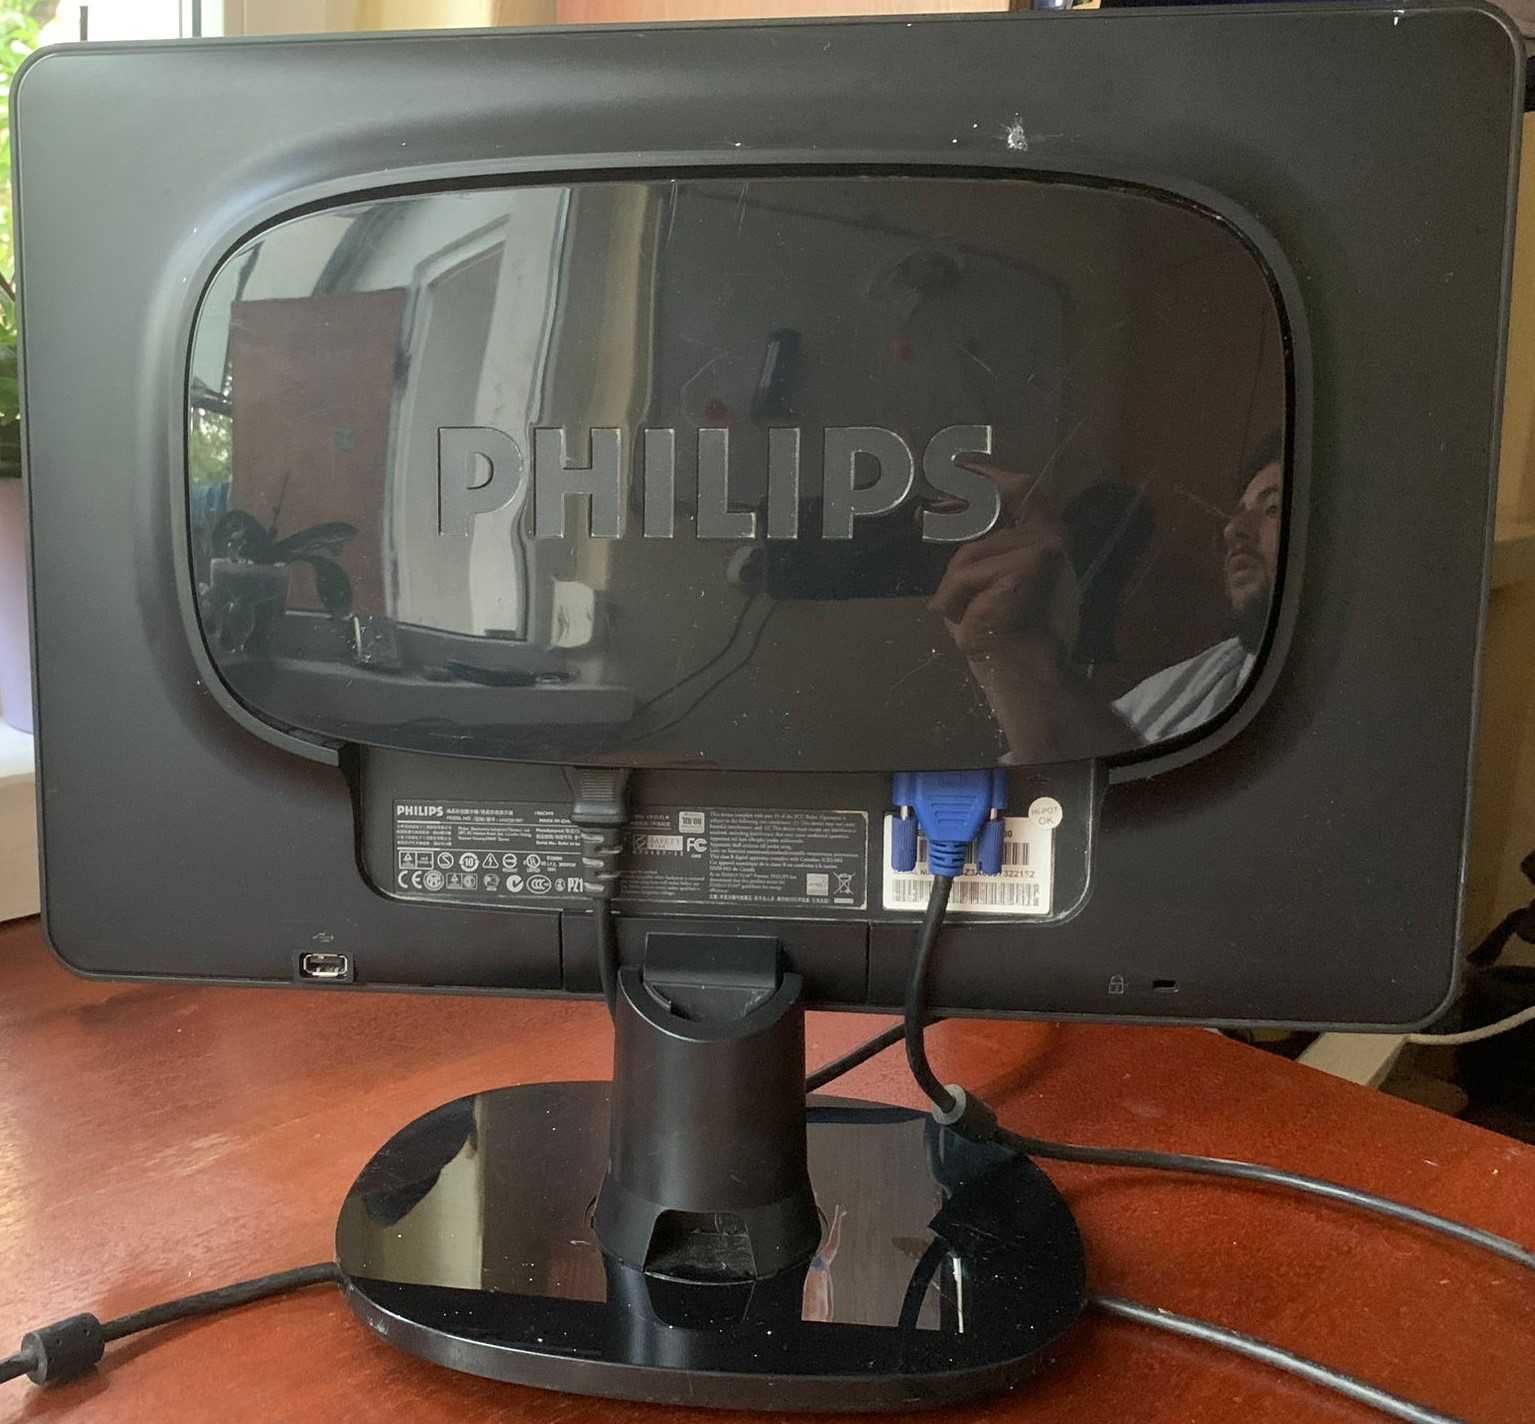 monitor LED Philips 19inch ideal pt supraveghere video model 190CW VGA